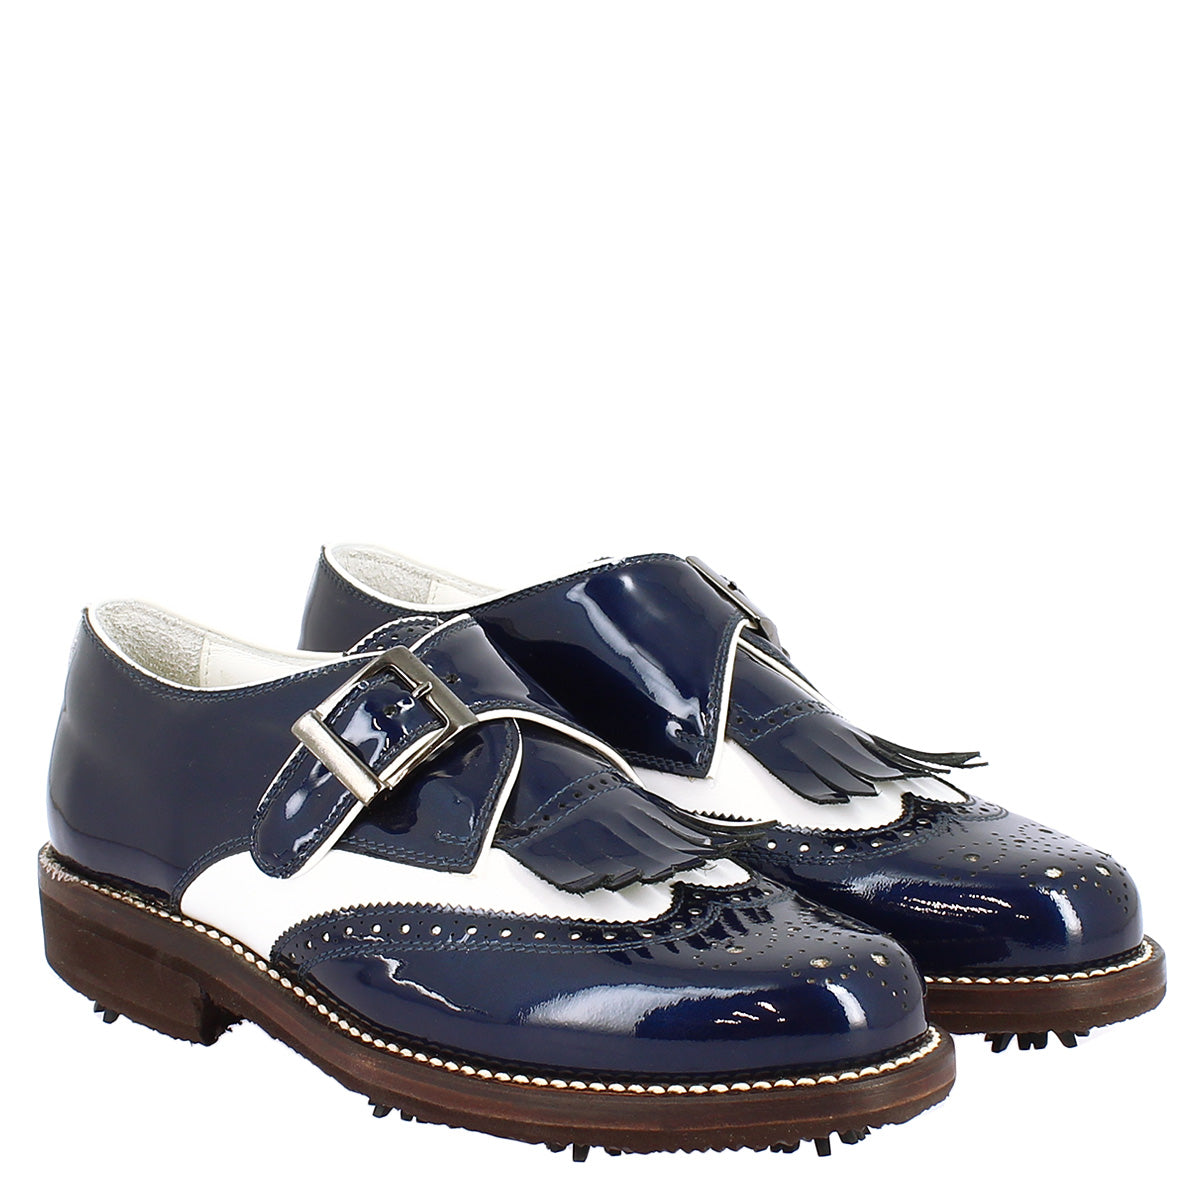 Women's buckle shoes in white leather and blue patent leather